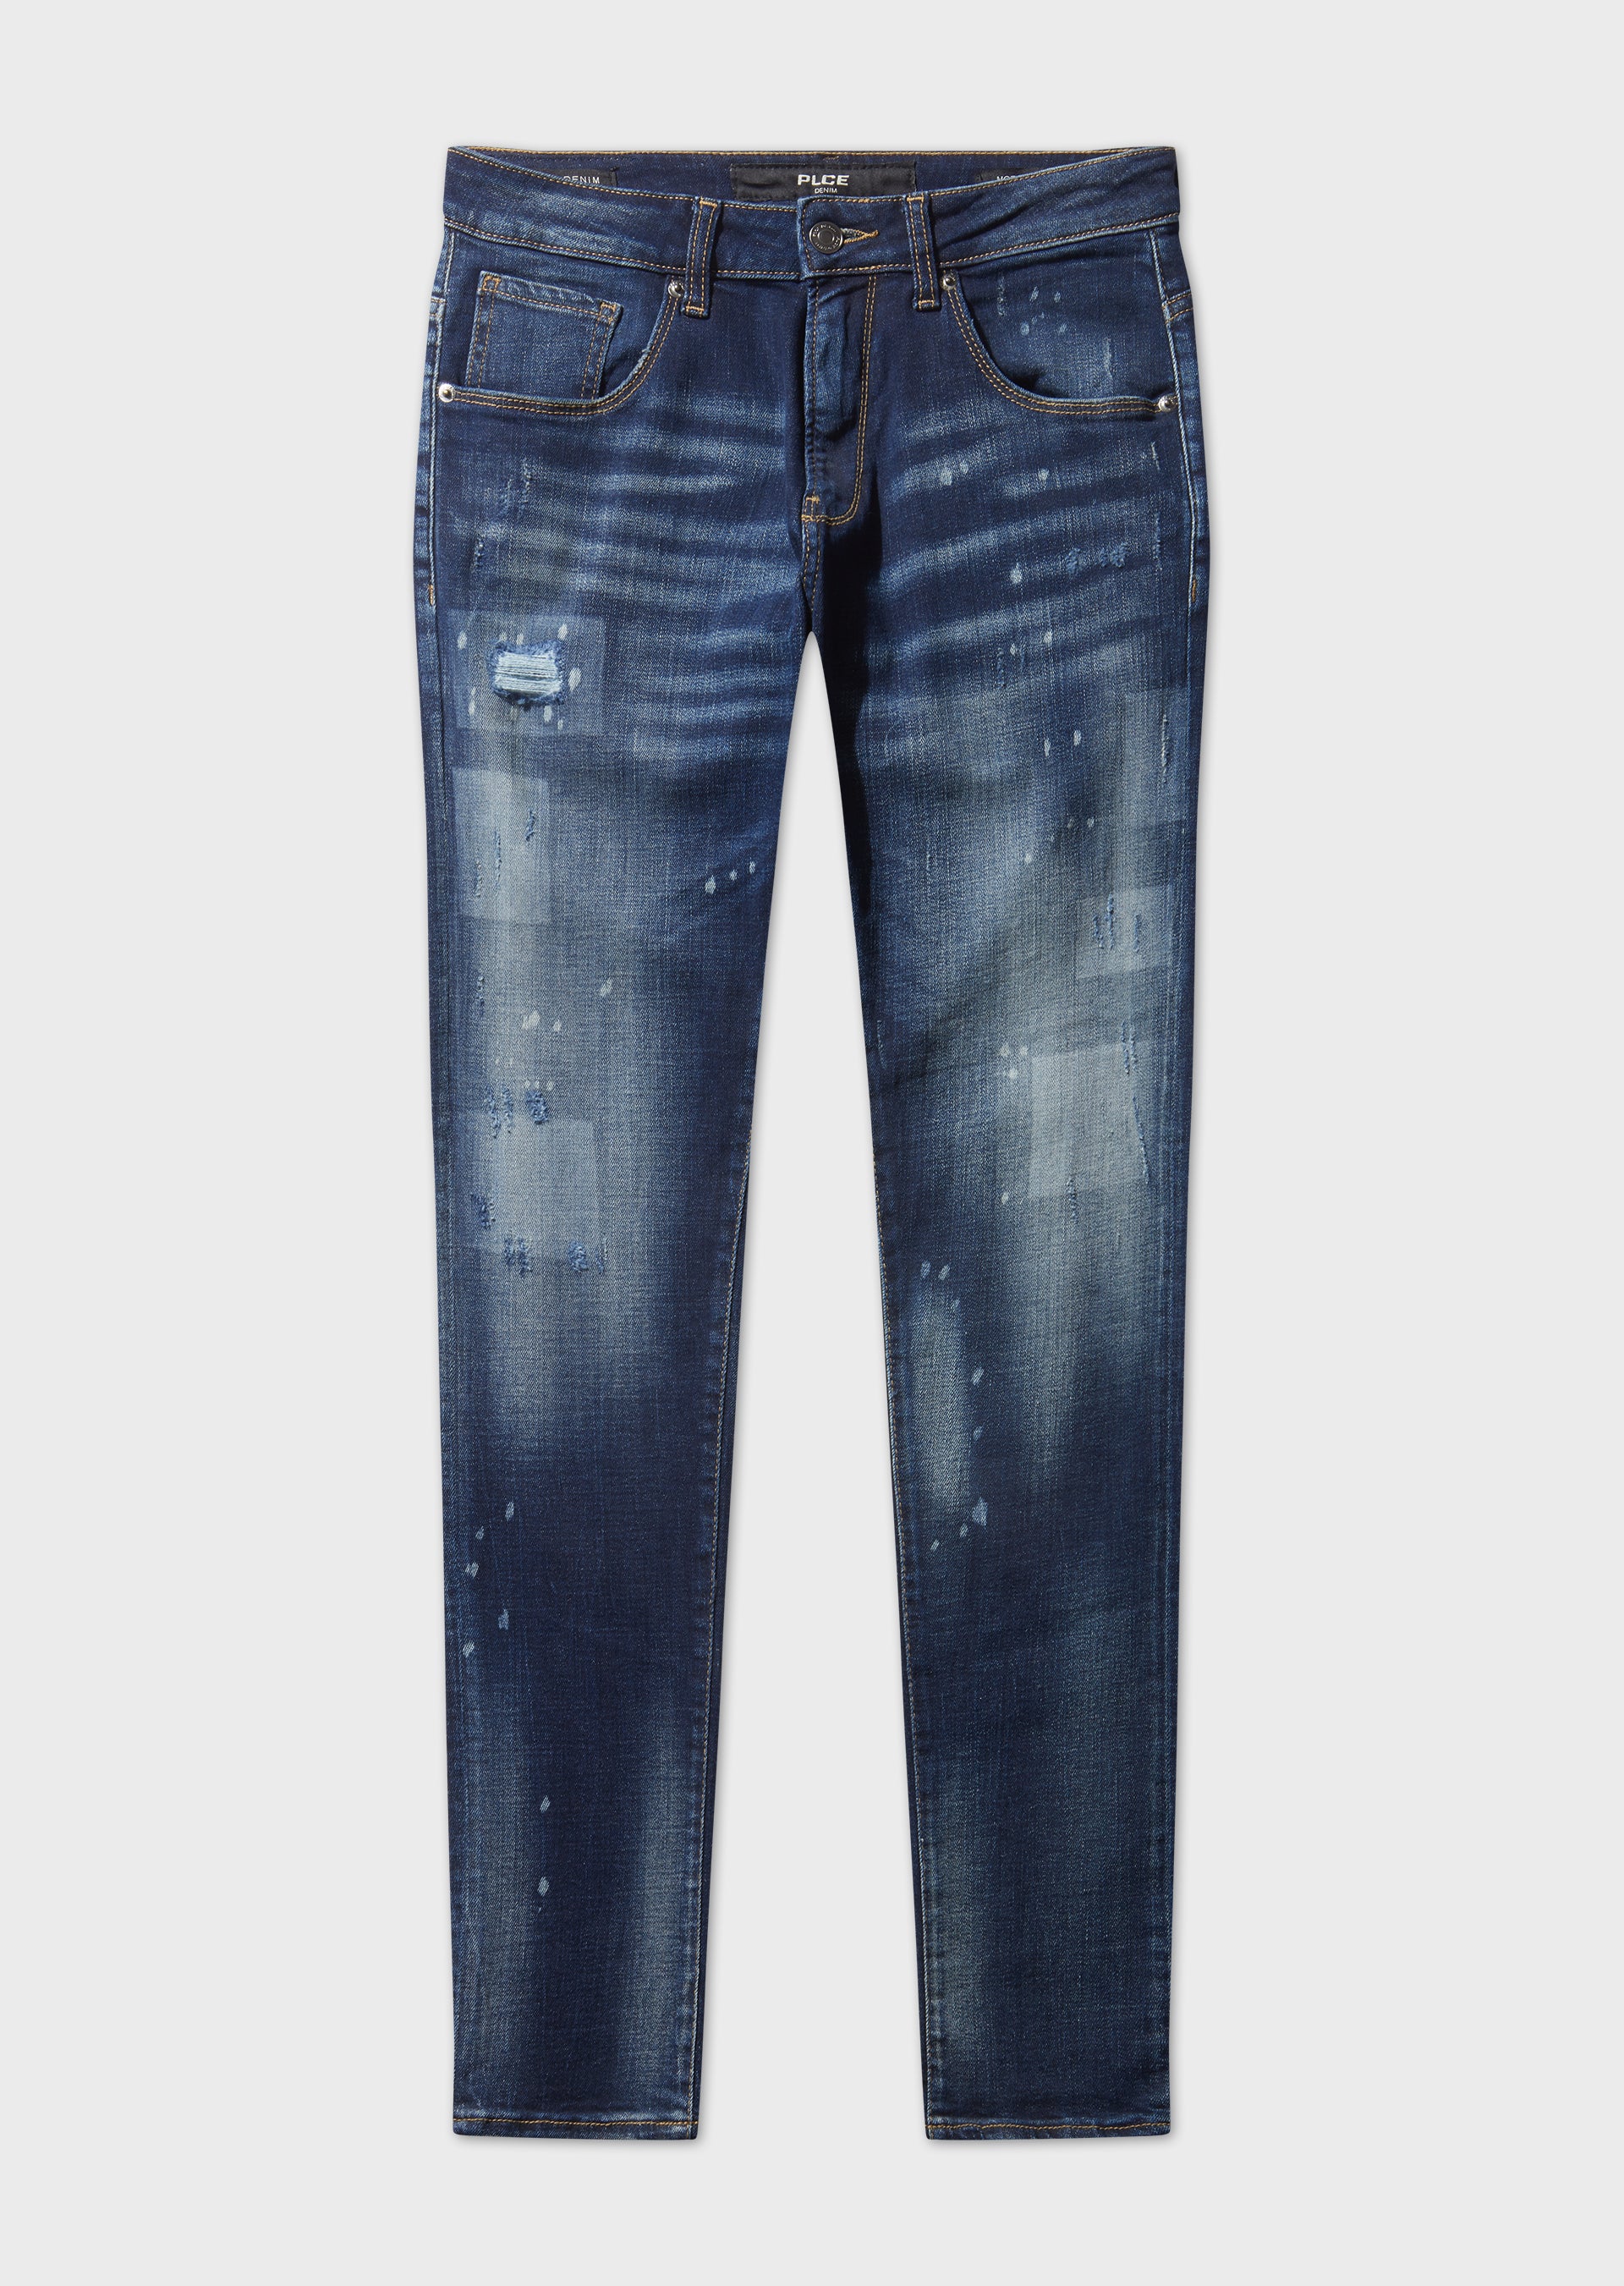 883 Police Vegas 254 Twisted Fit Jeans | Shop Men's 883 Police Jeans